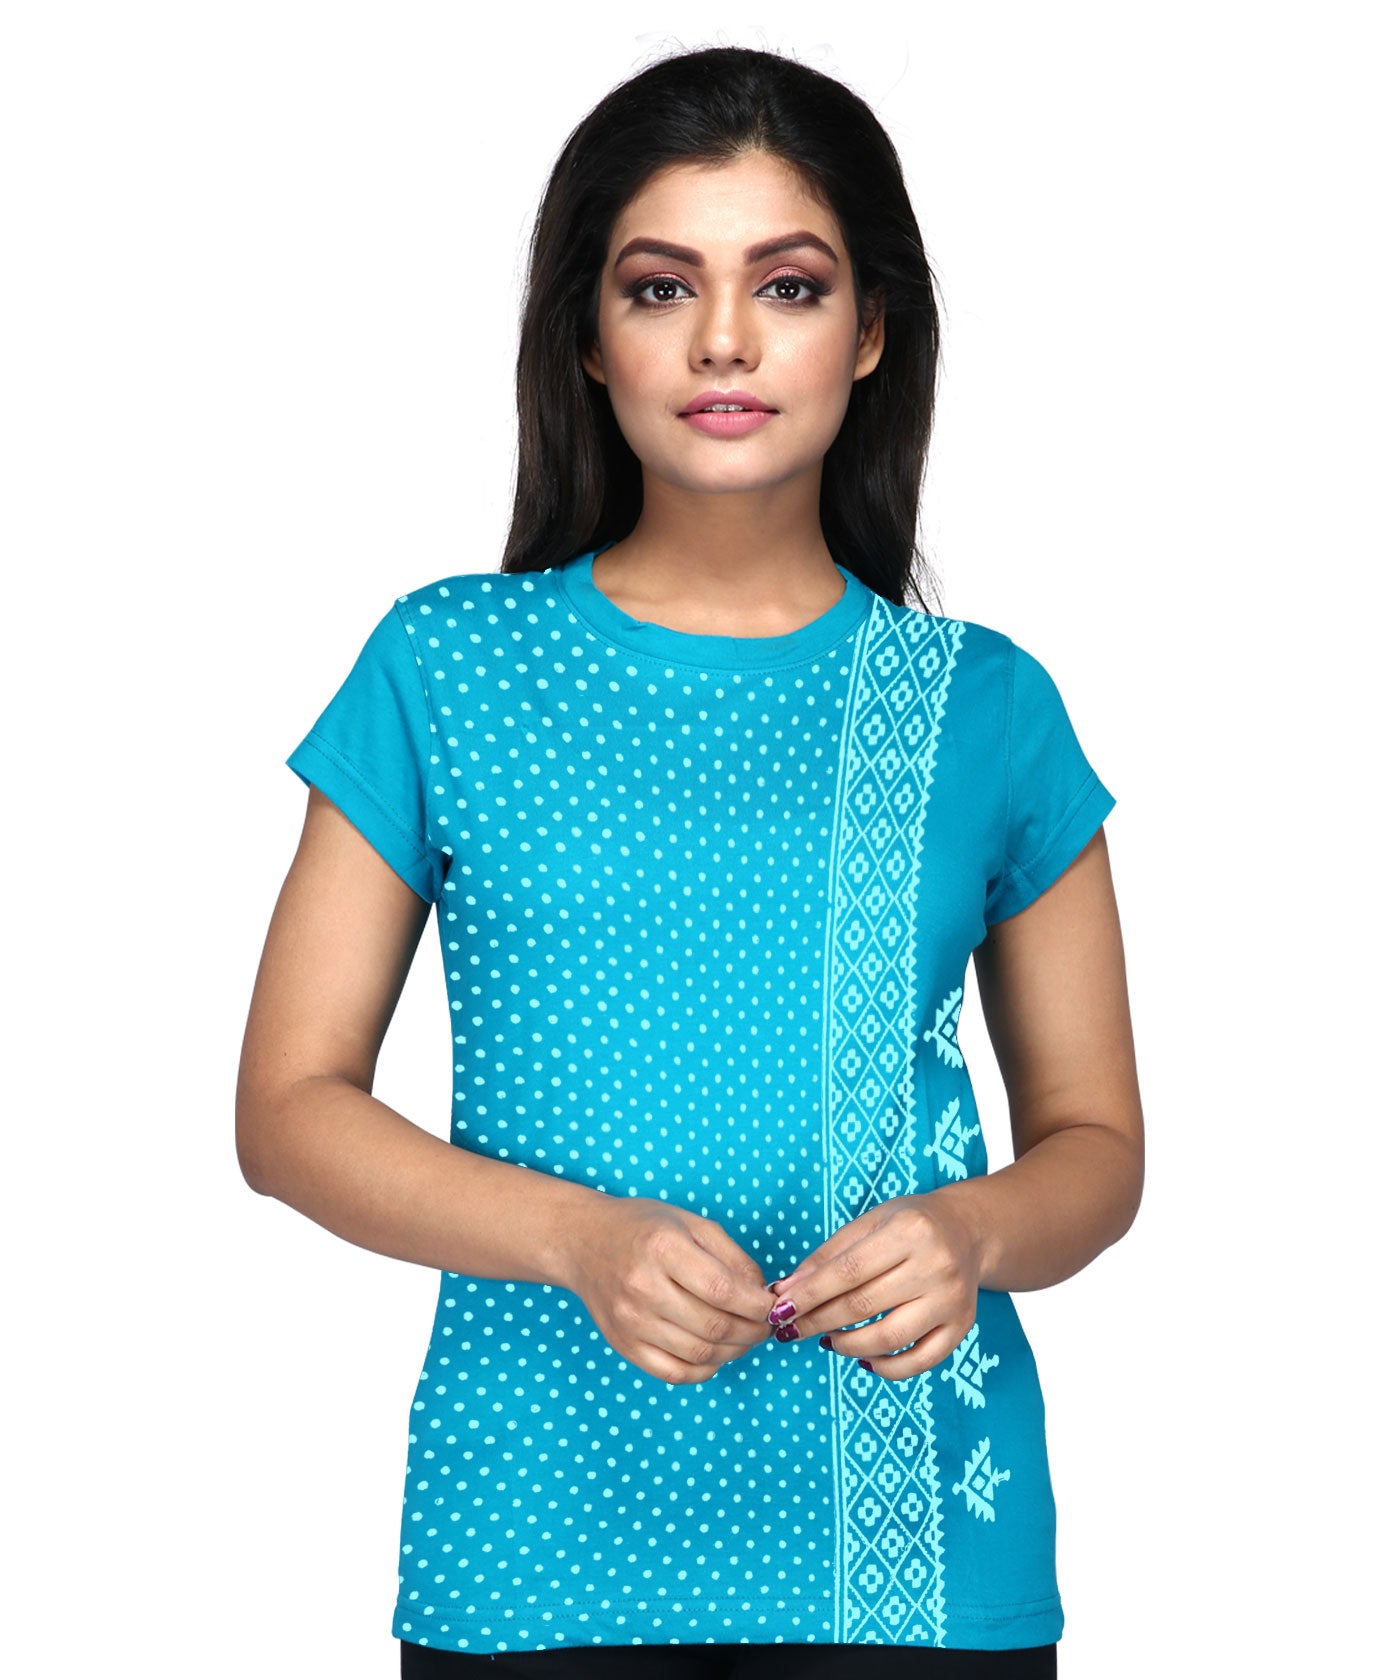 Not All Over - Block Print Tees for Women - Turquoise